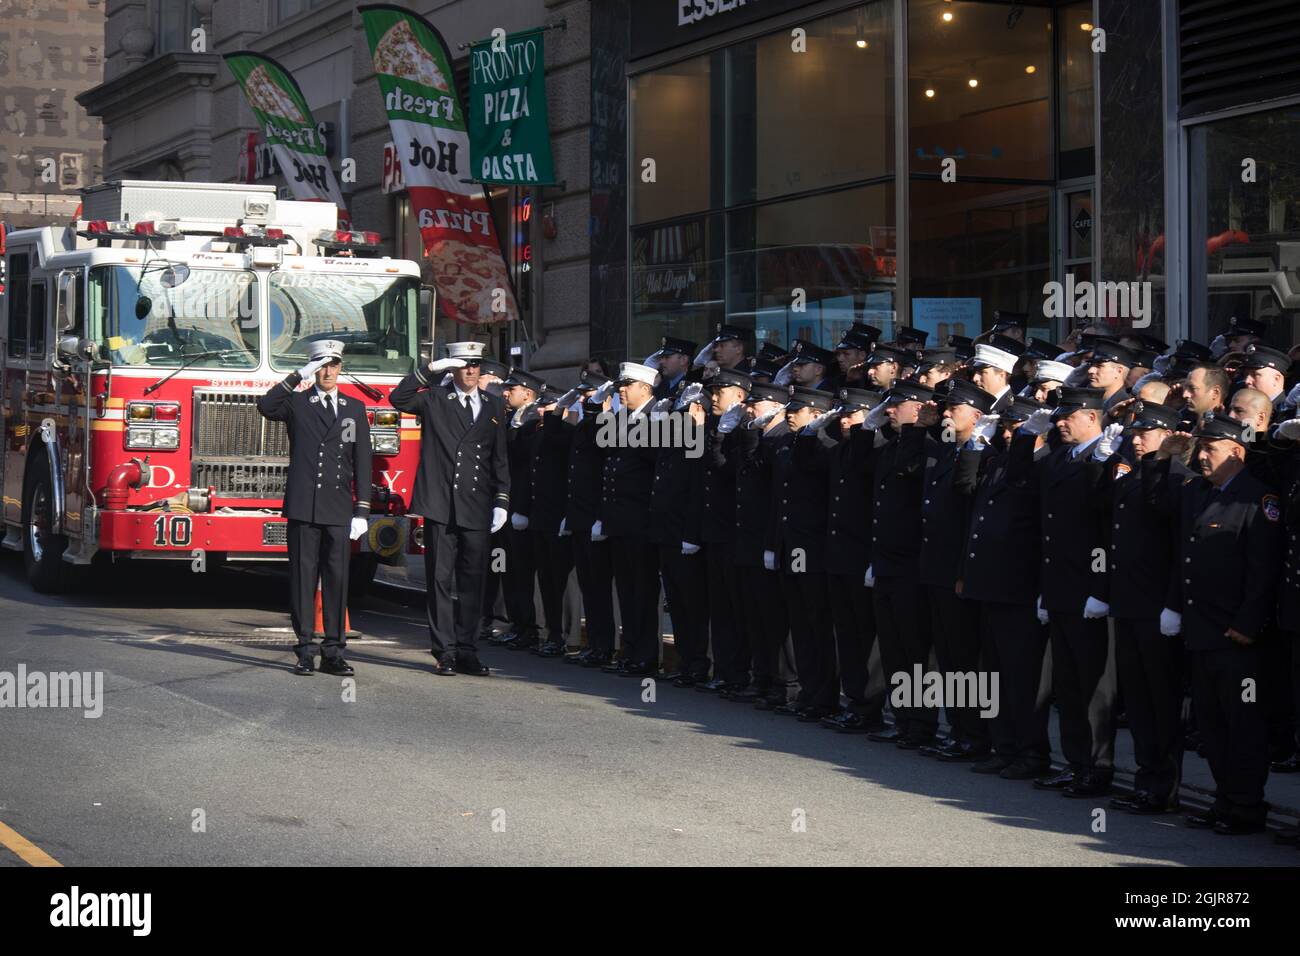 Members of FDNY Ten House, Engine Company 10 and Ladder Company 10, stand at attention in remembrance of the 343 firefighters who gave their lives on 9/11/01, on the 20th anniversary of the September 11, 2001 terrorist attack on the World Trade Center and the Pentagon in New York, New York, on Saturday, September 11, 2021.Credit: Allan Tannenbaum for CNP/MediaPunch Stock Photo